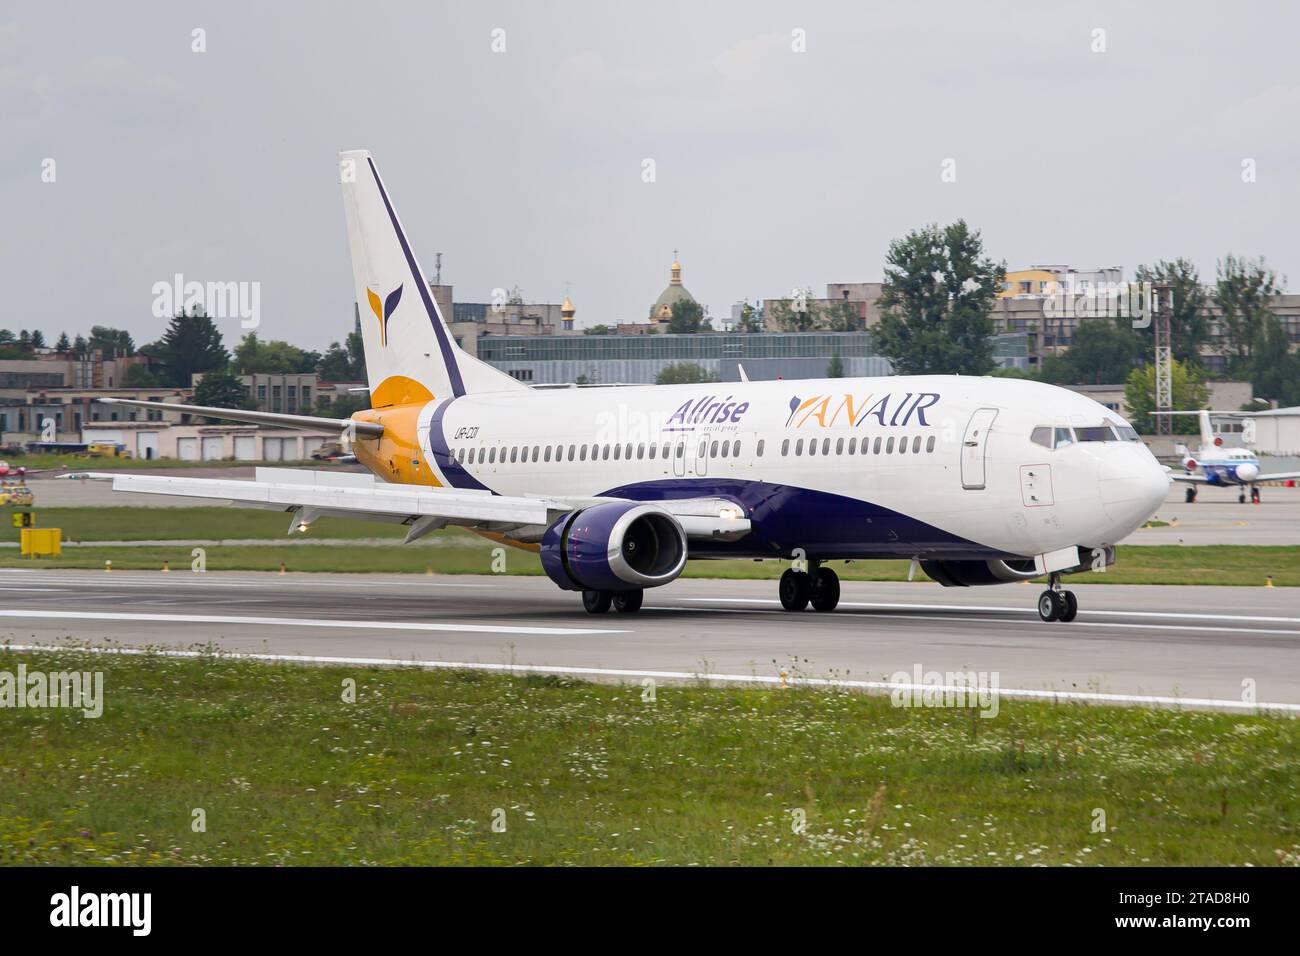 Ukrainian airline YanAir Boeing 737-400 slowing down after landing at Lviv Airport Stock Photo